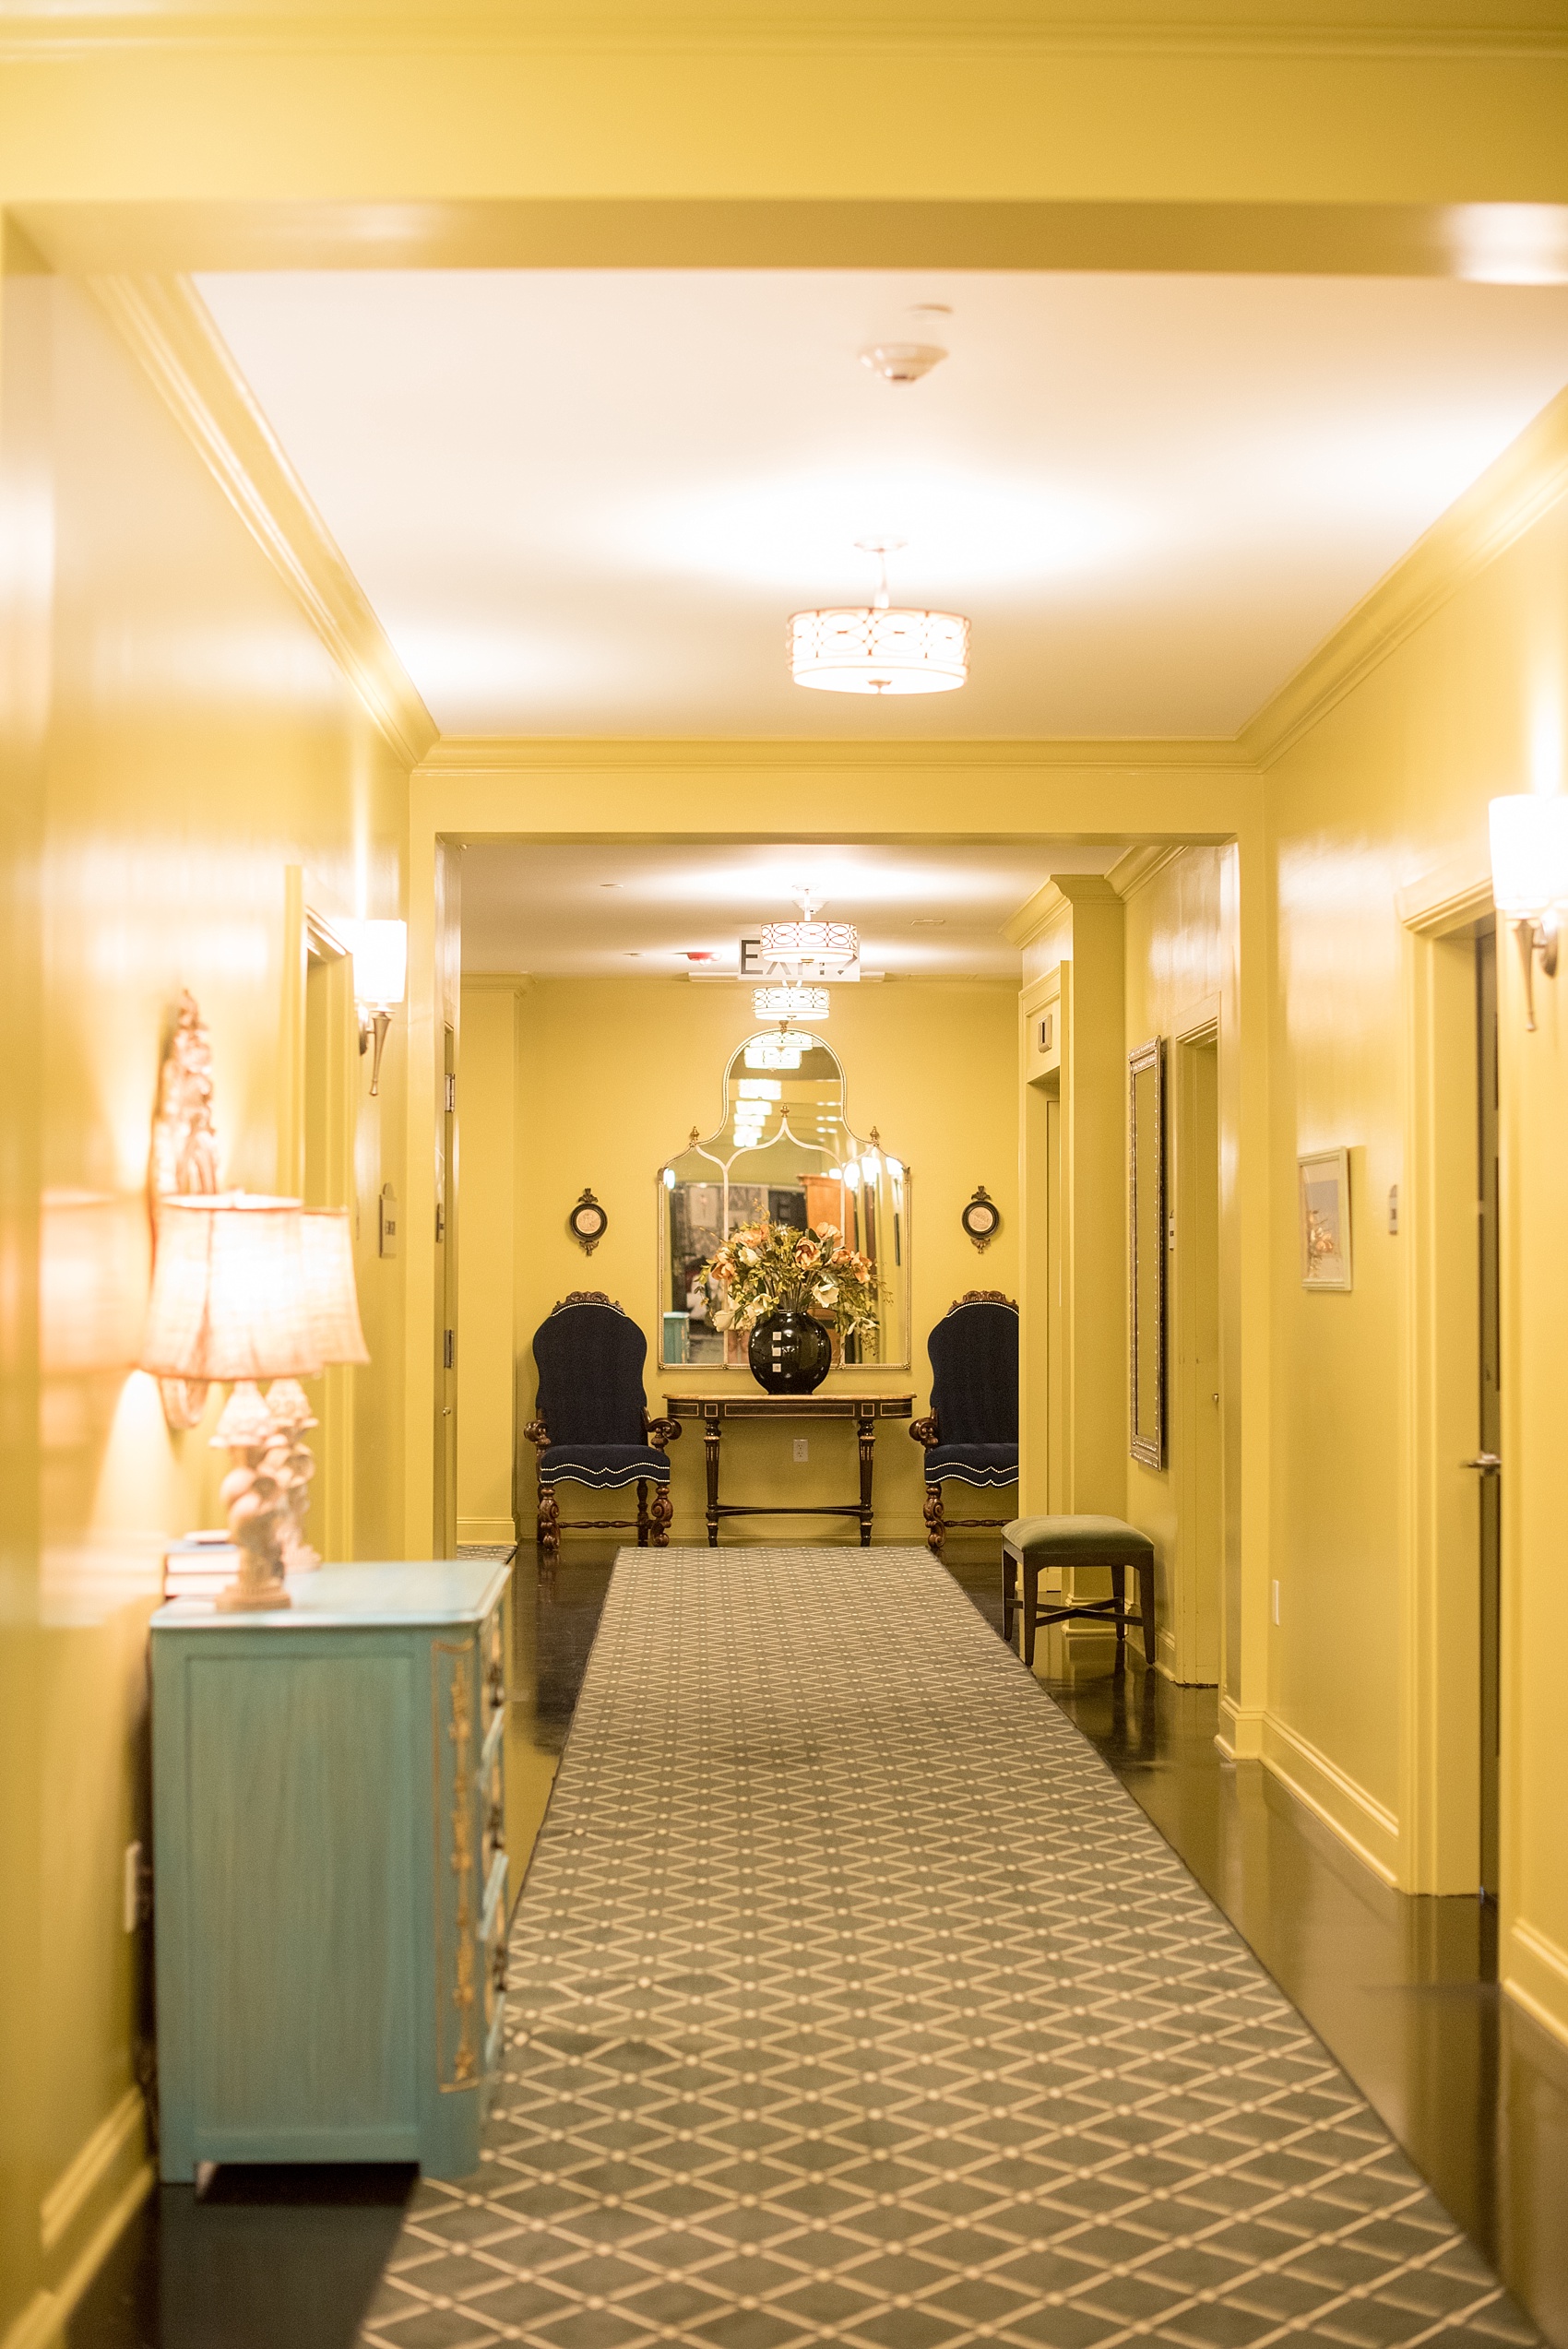 Mikkel Paige Photography, Raleigh wedding photographer, photos of The Mayton Inn hotel and venue in Cary, NC. Yellow hallways with black chairs and blue dresser detail images.